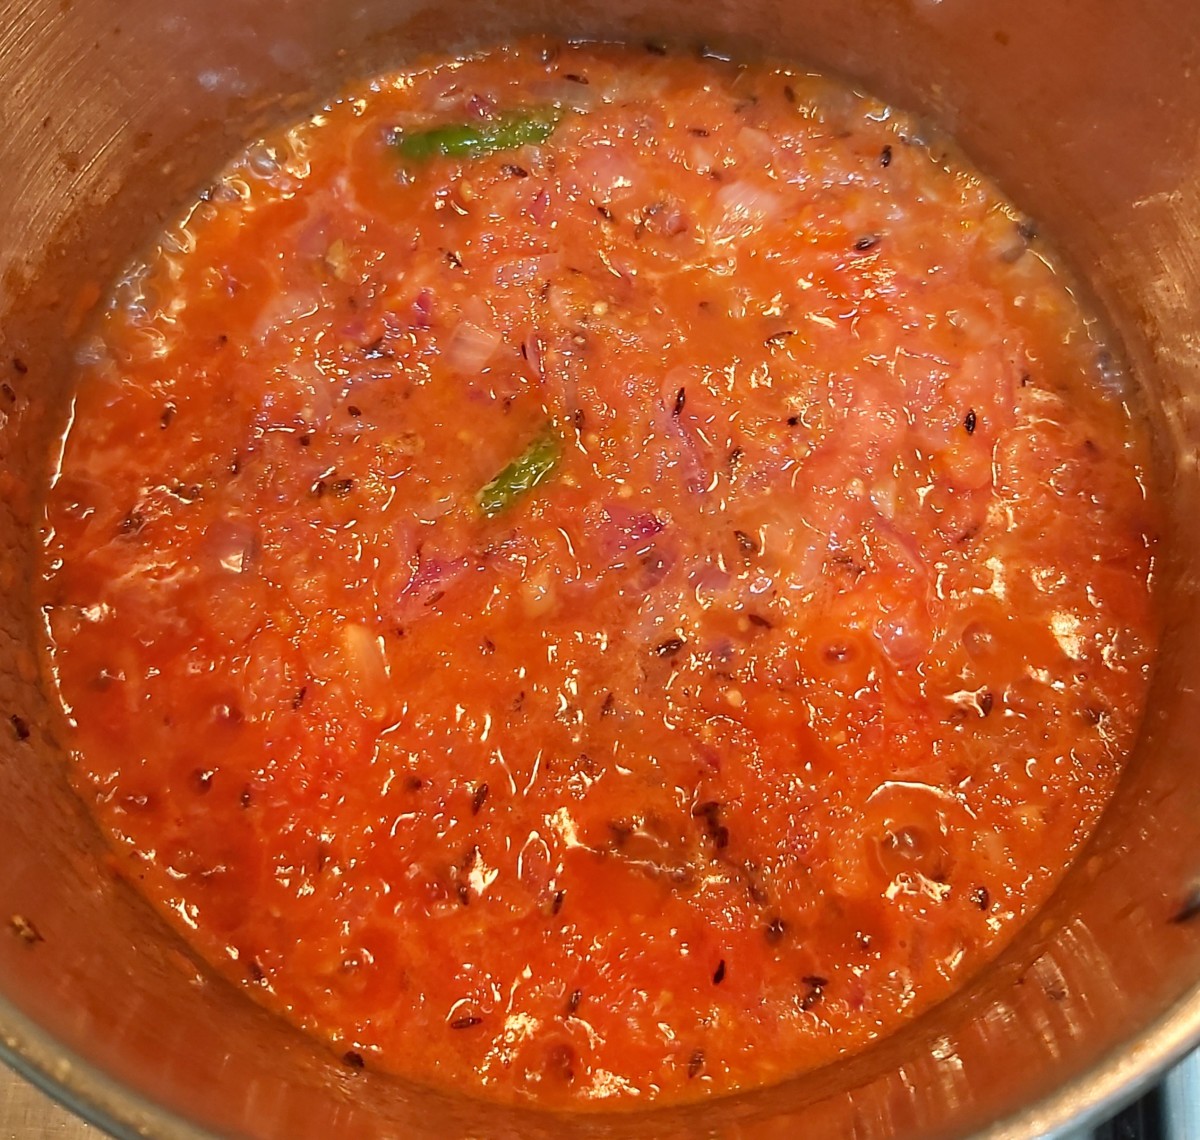 Mix well and fry in medium low flame for 2-3 minutes till raw smell of tomatoes goes away.